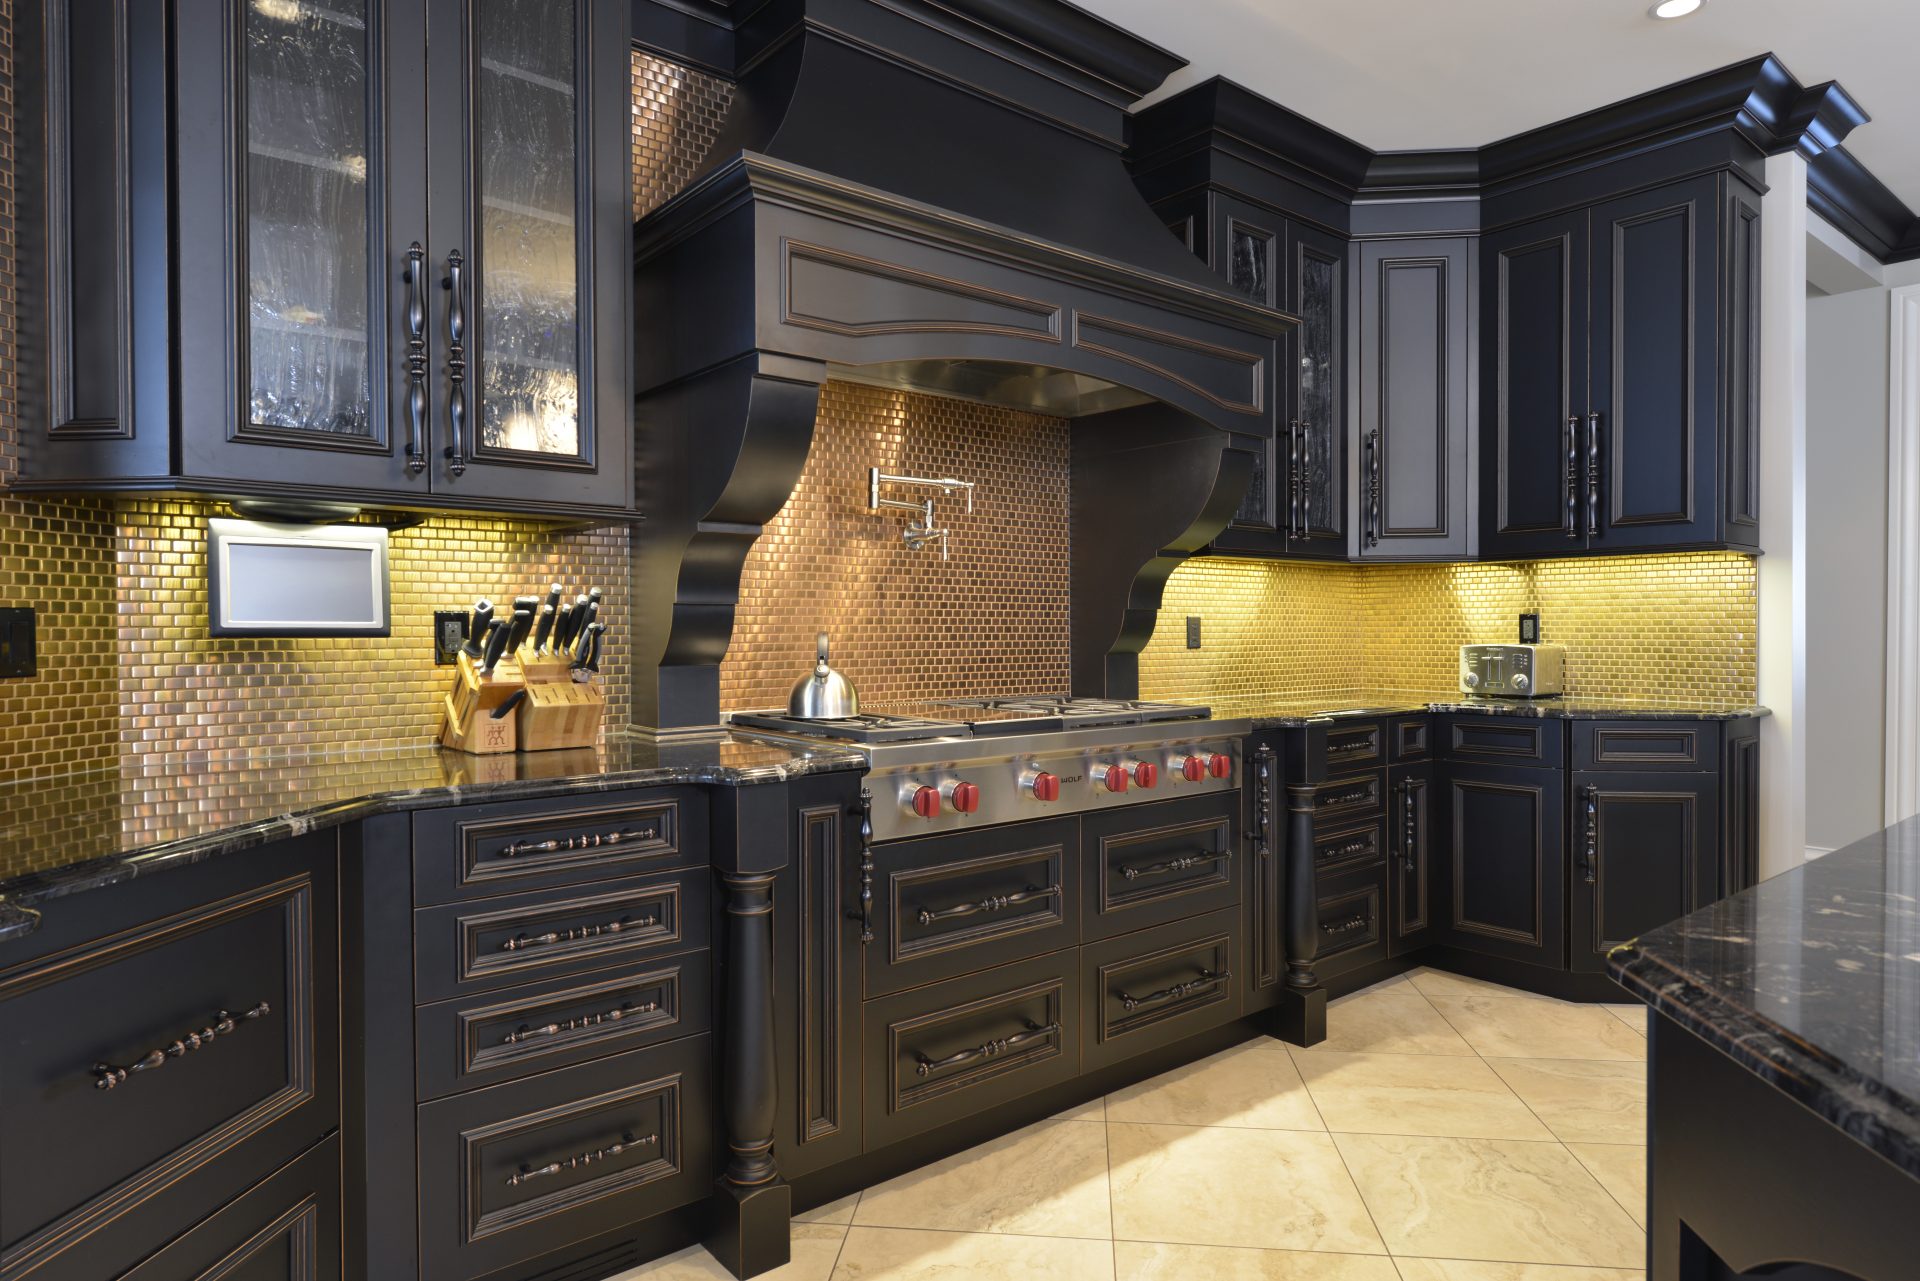 Dark cabinets in a kitchen with a bronze blacksplash and a silver pot filler over the stove